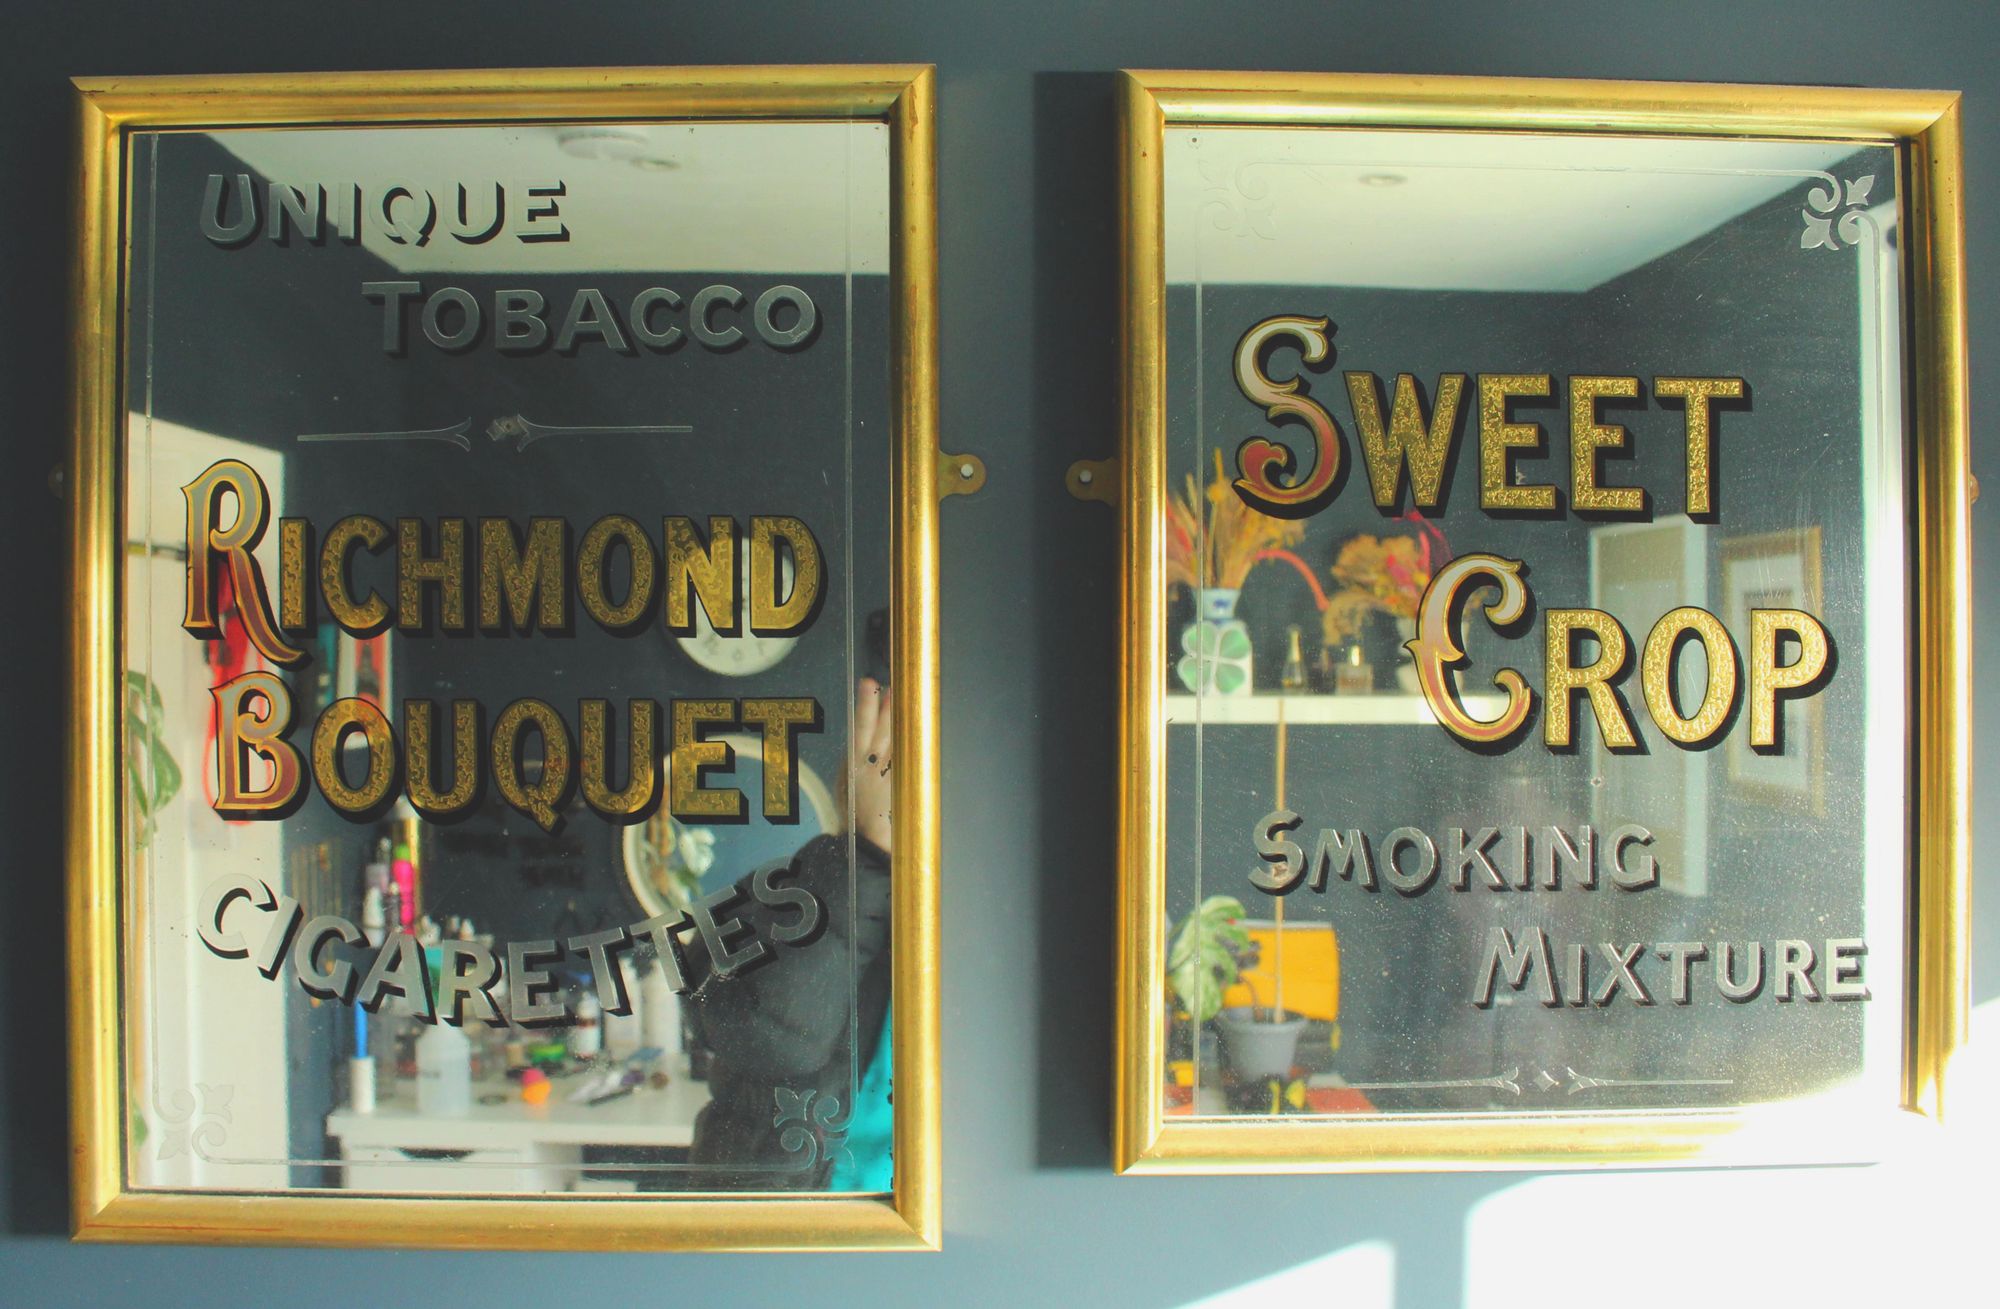 Frame mirrors with gold leaf and painted lettering advertising two tobacco brands.